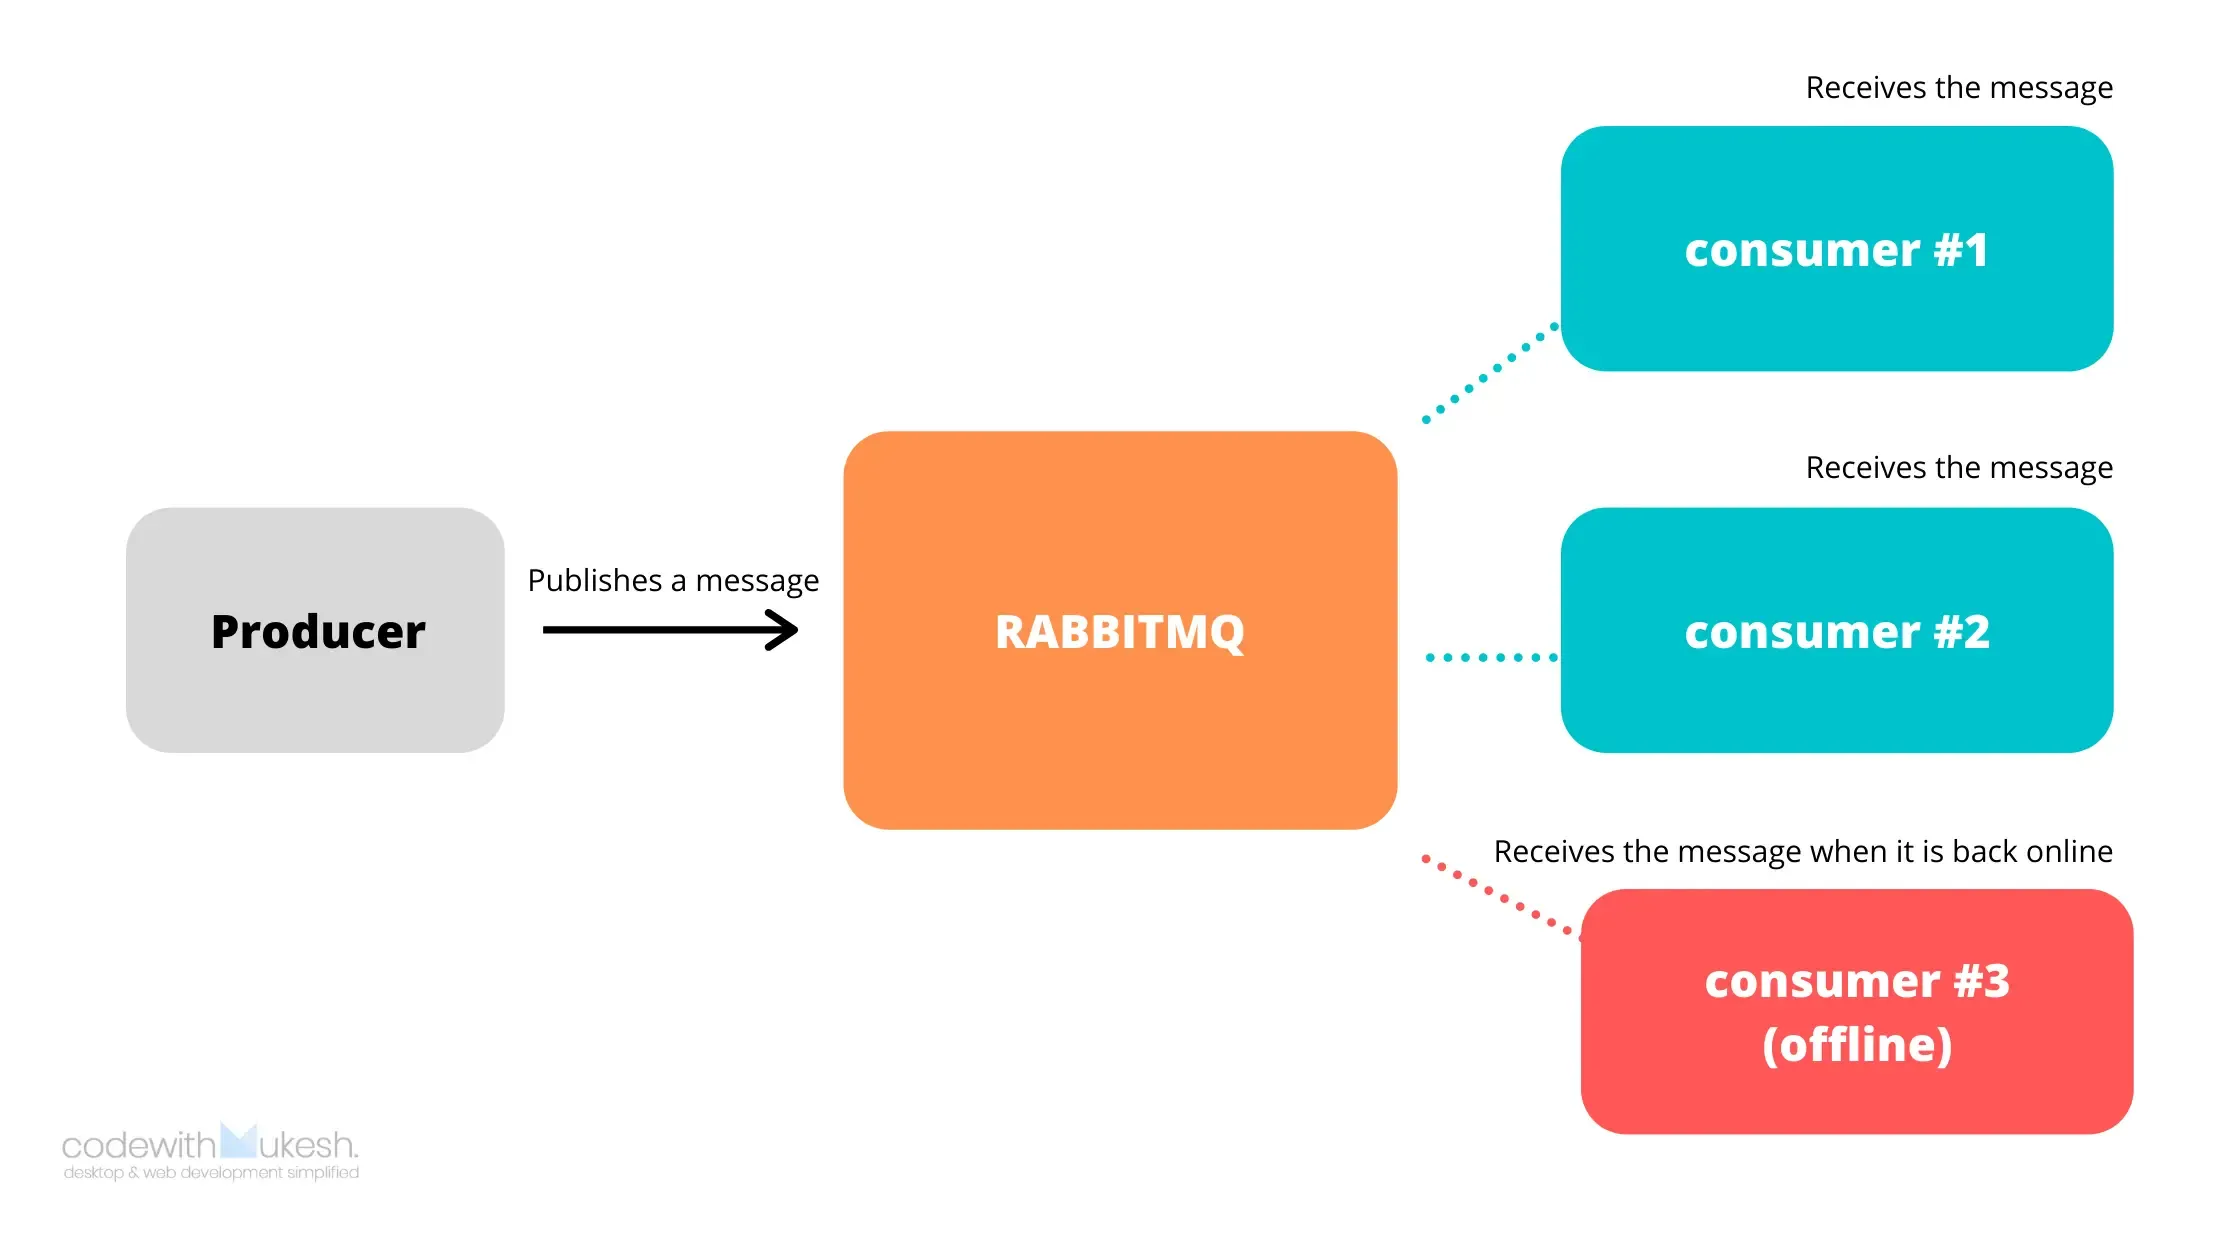 rabbitmq-with-aspnet-core-microservice